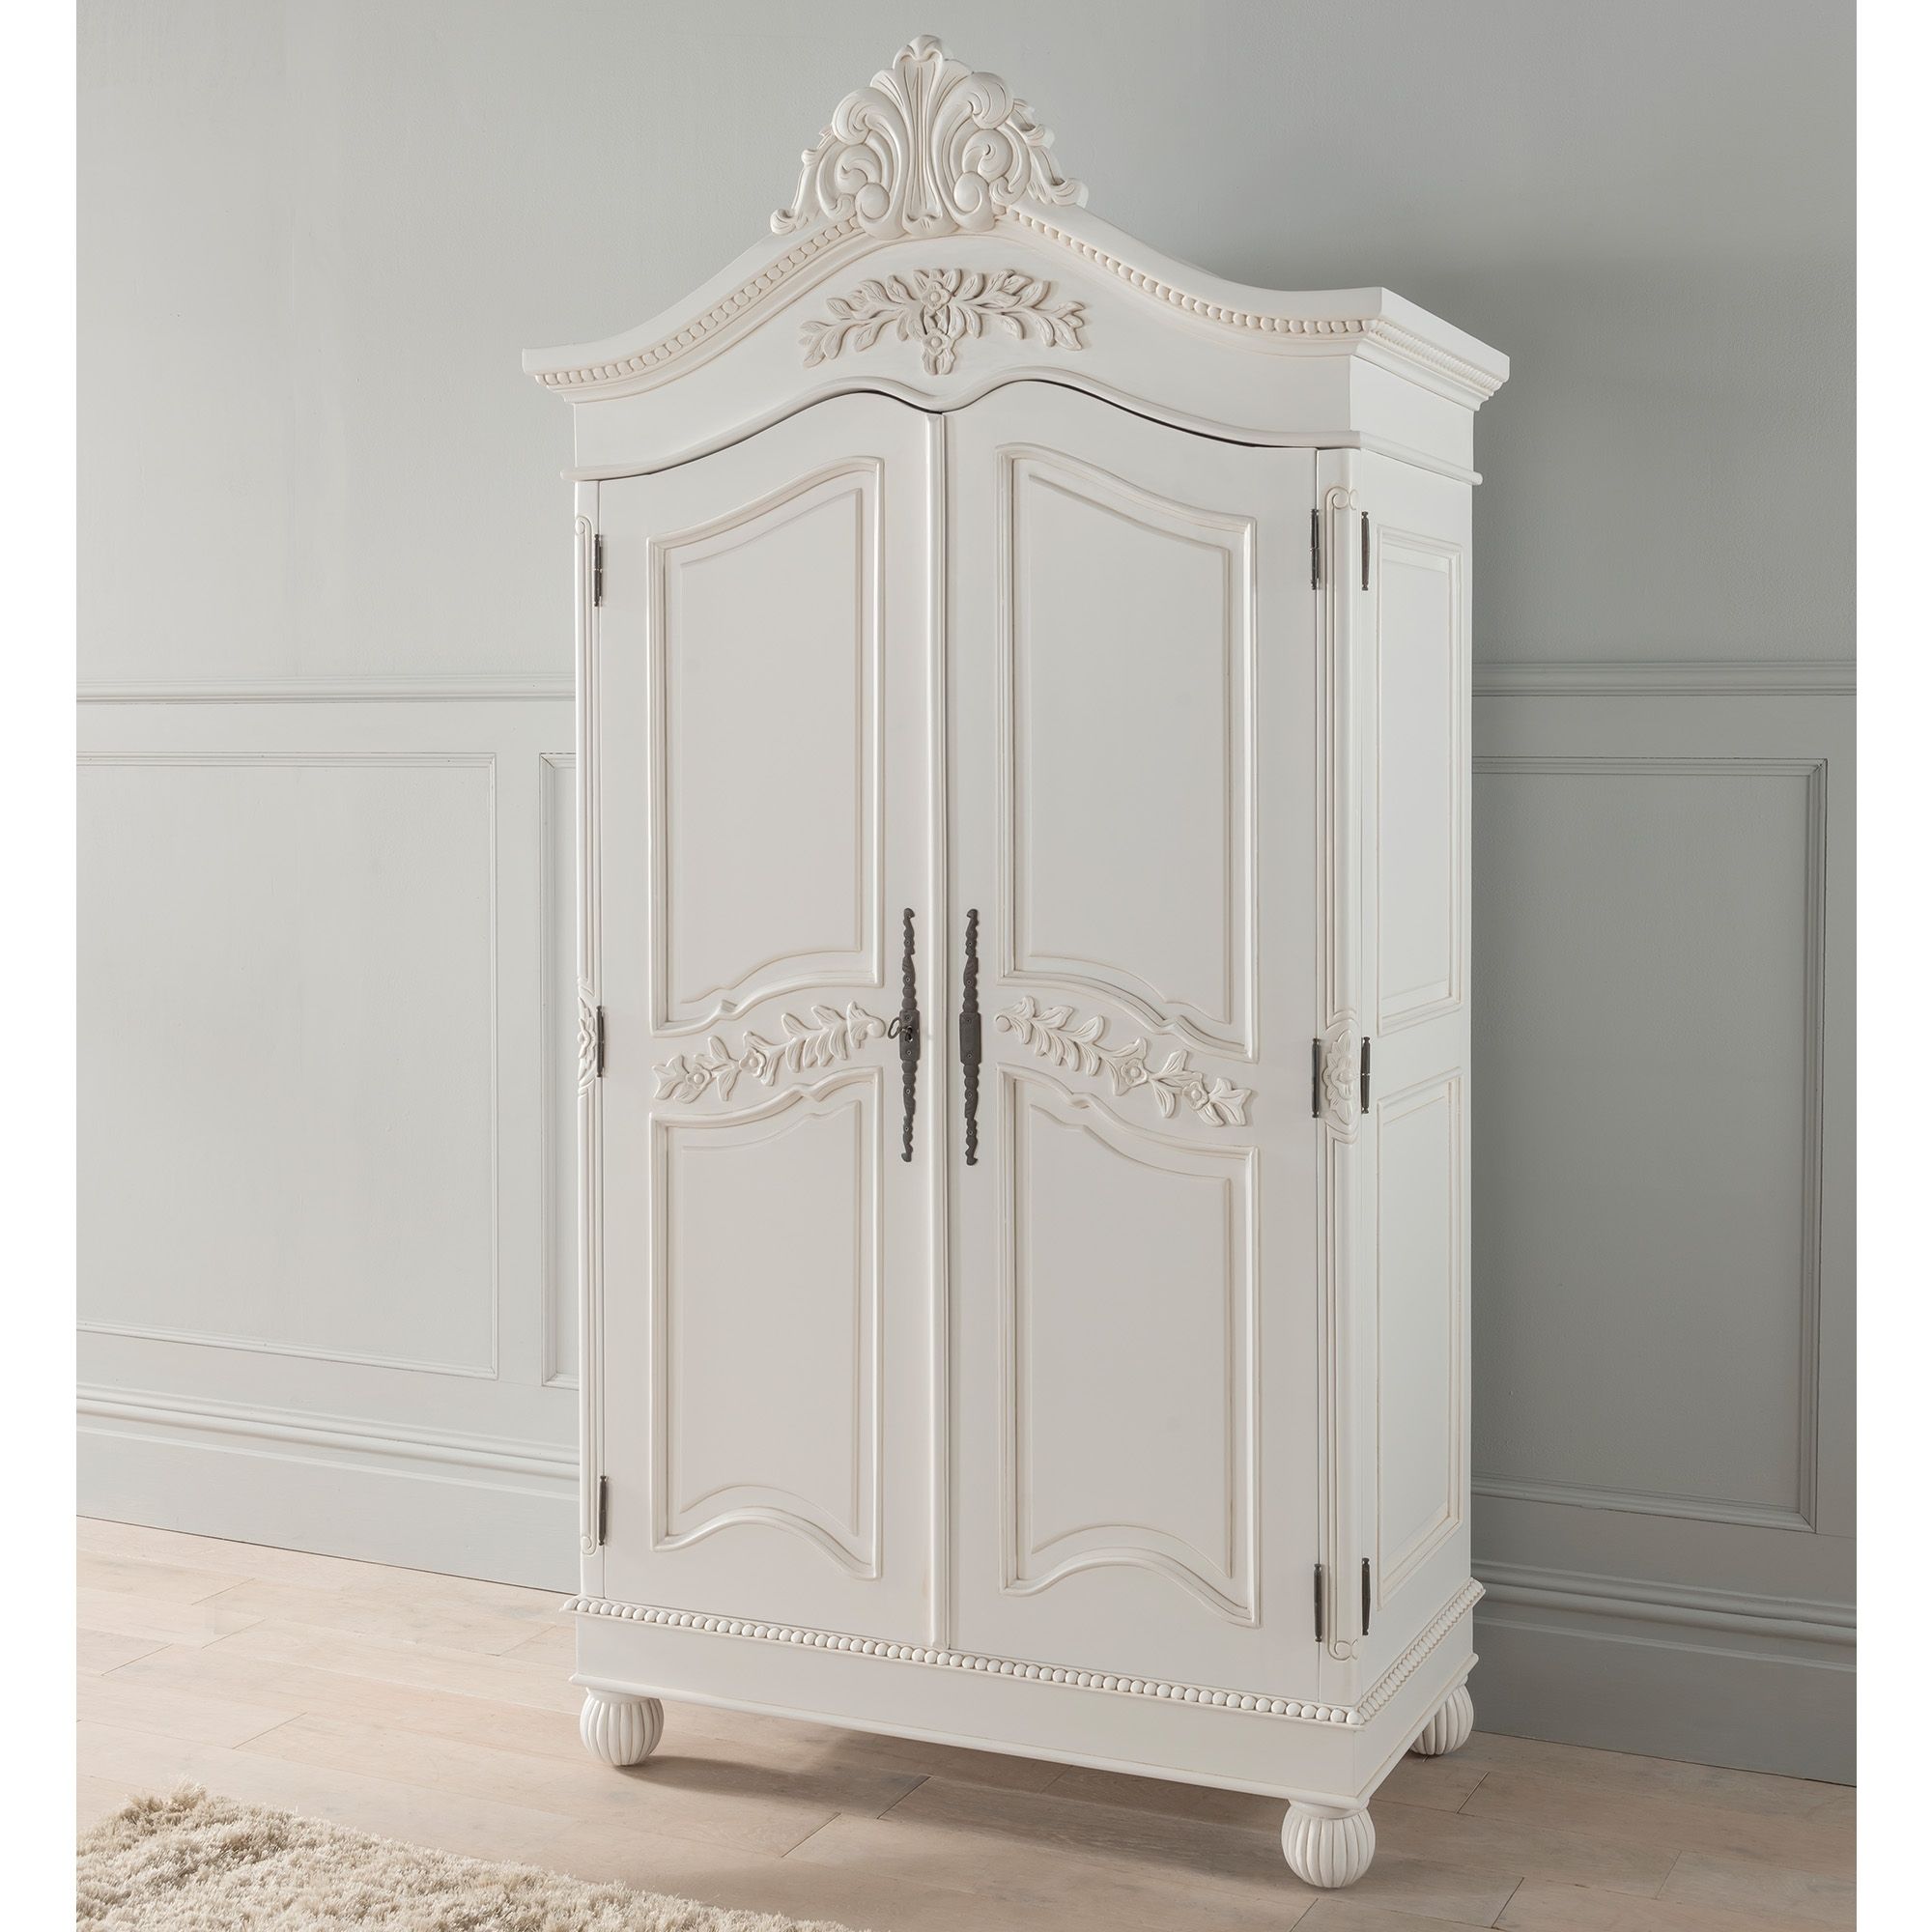 Antique French Style Wardrobe | Shabby Chic Bedroom Furniture In Cheap Shabby Chic Wardrobes (Photo 2 of 15)